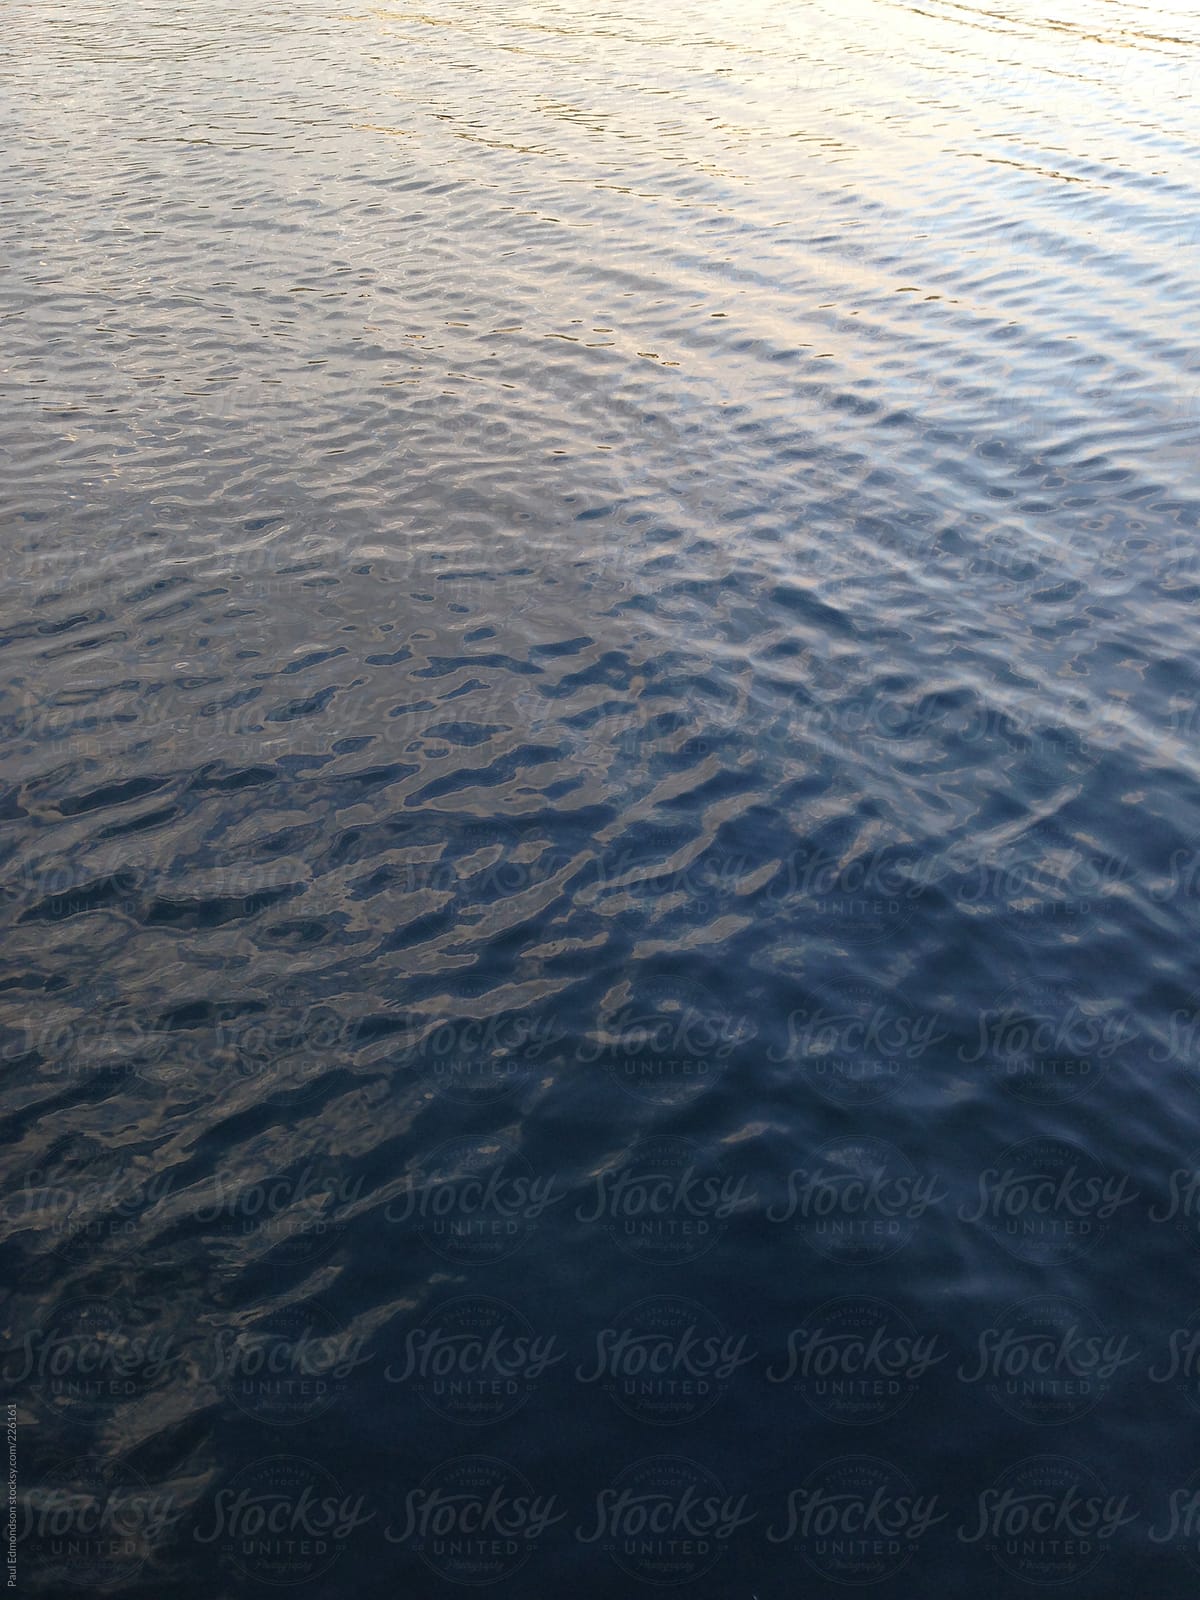 Reflections and ripples on ocean water, dusk